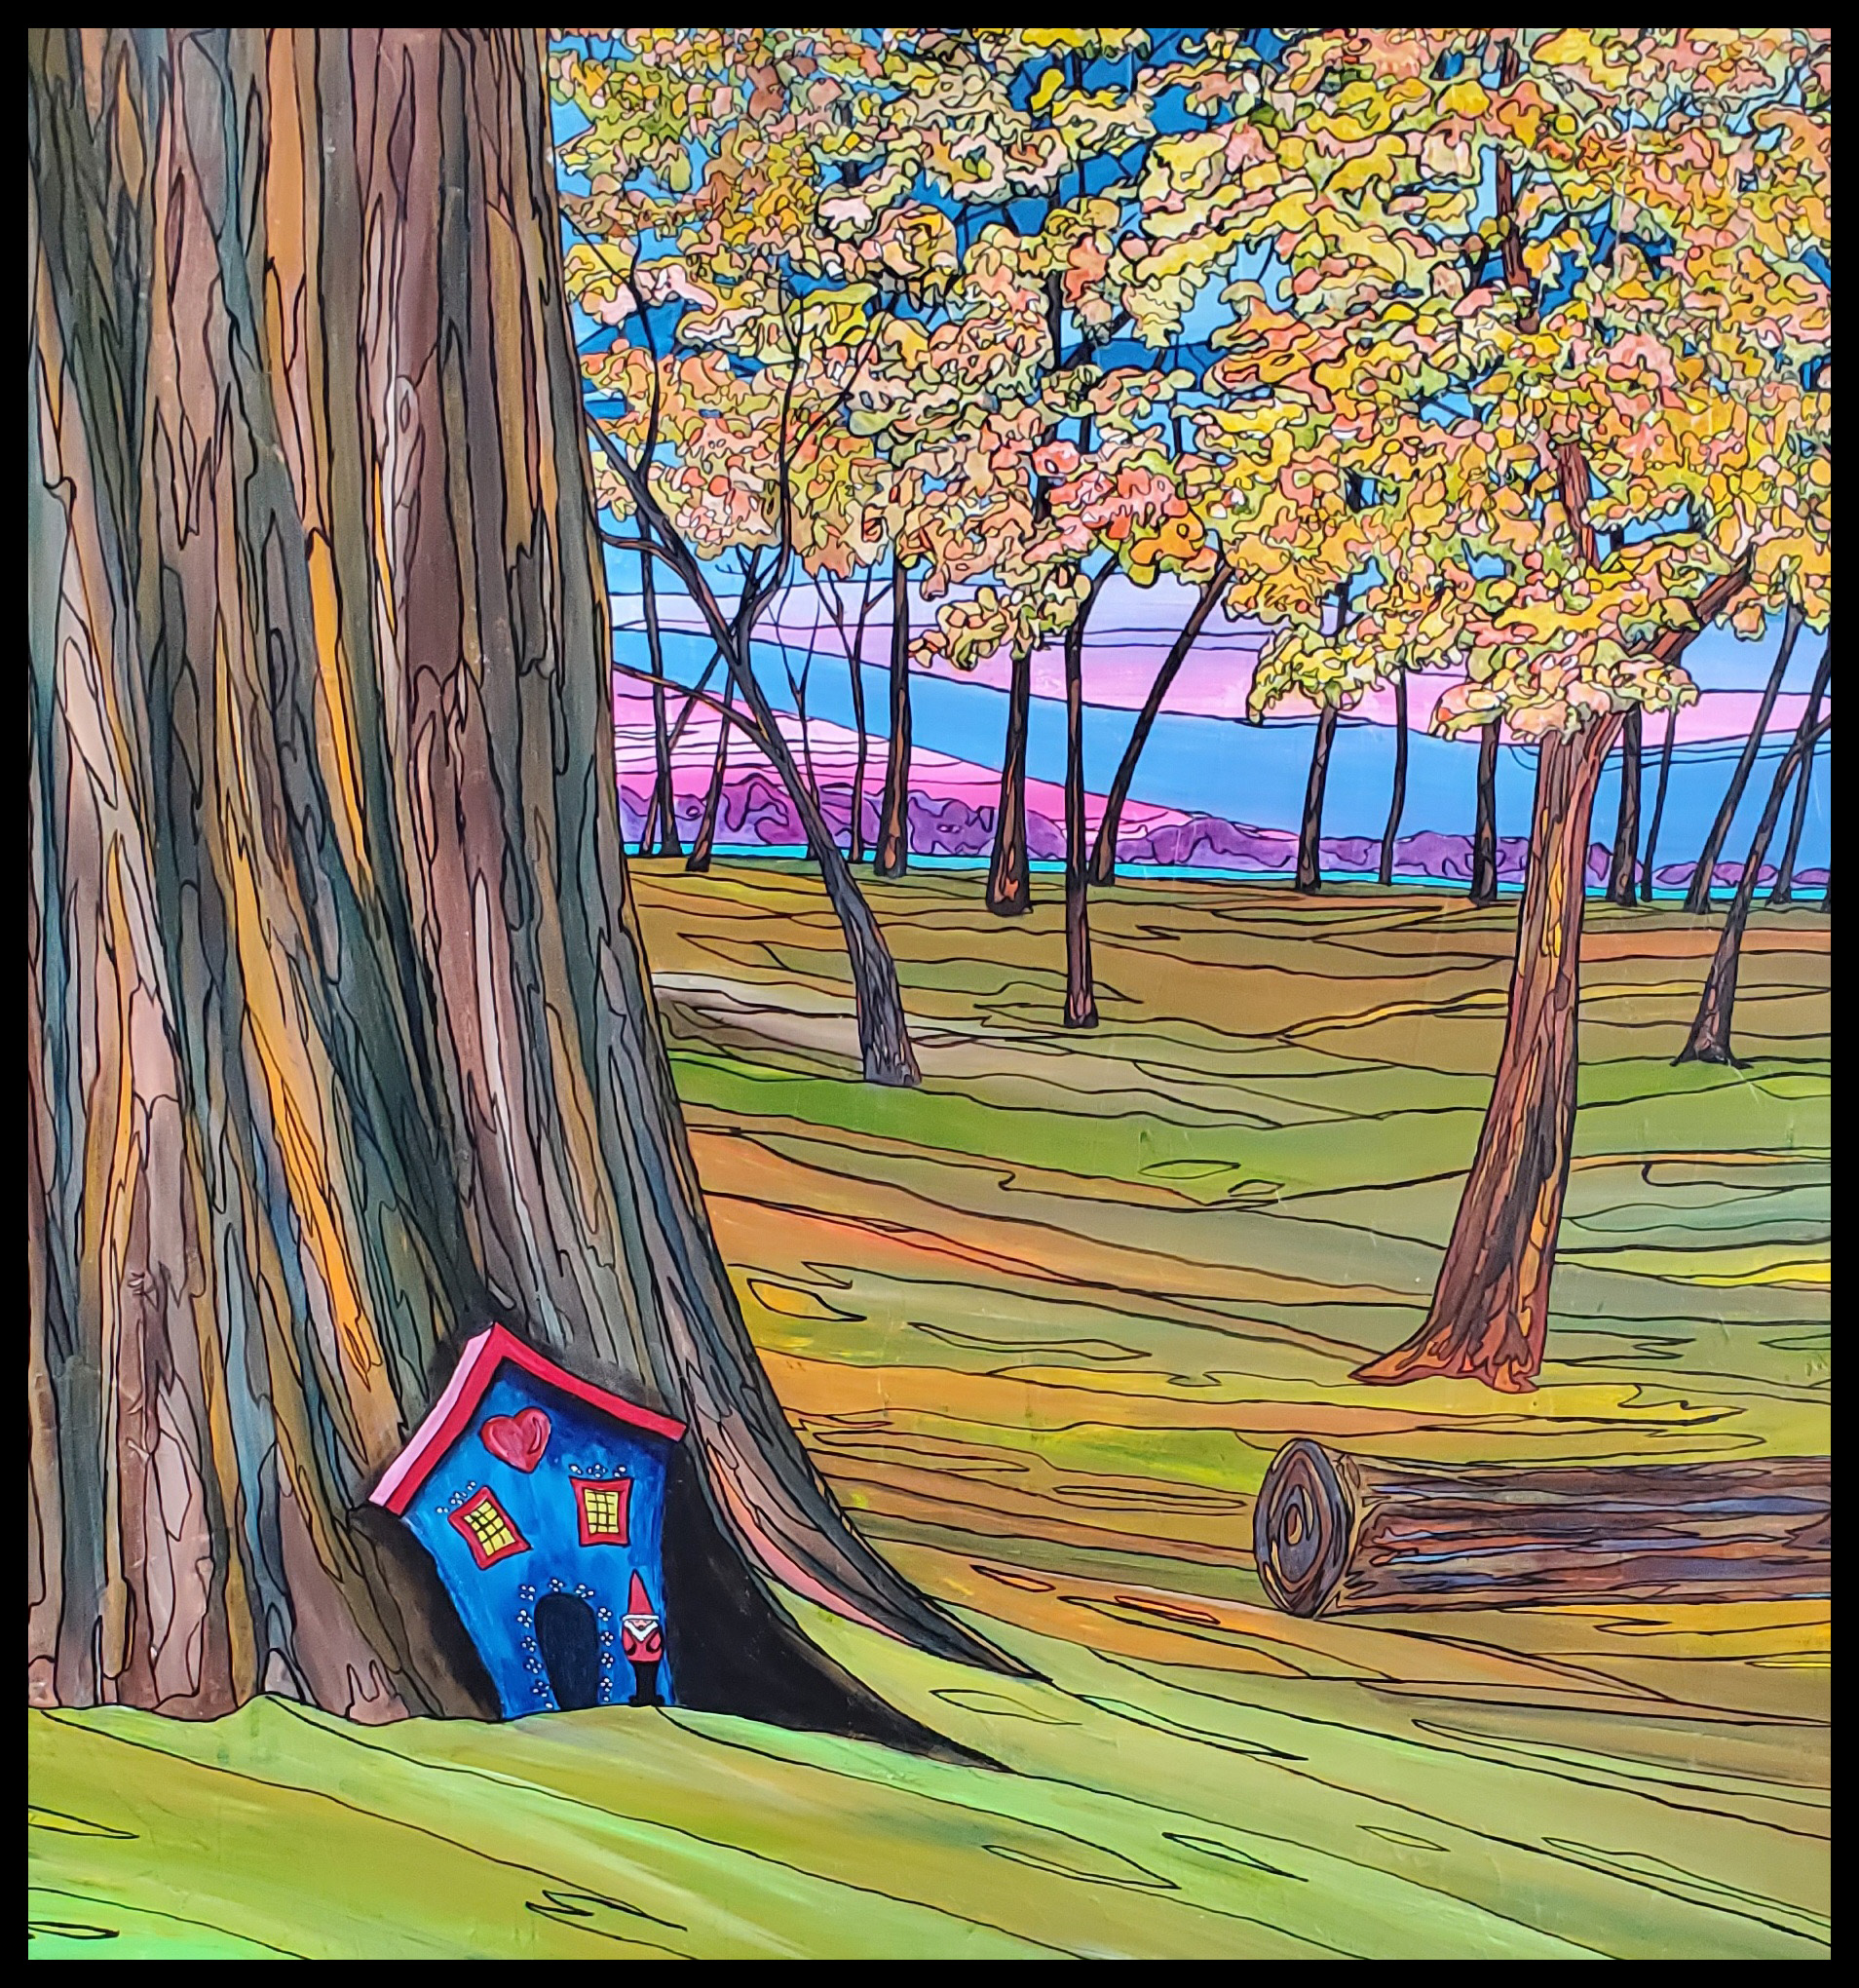 2022-200 "Gnome Home"
Image: 36" x 36"
Framed: 39" x 39"
Acrylic on Canvas
$2200.00